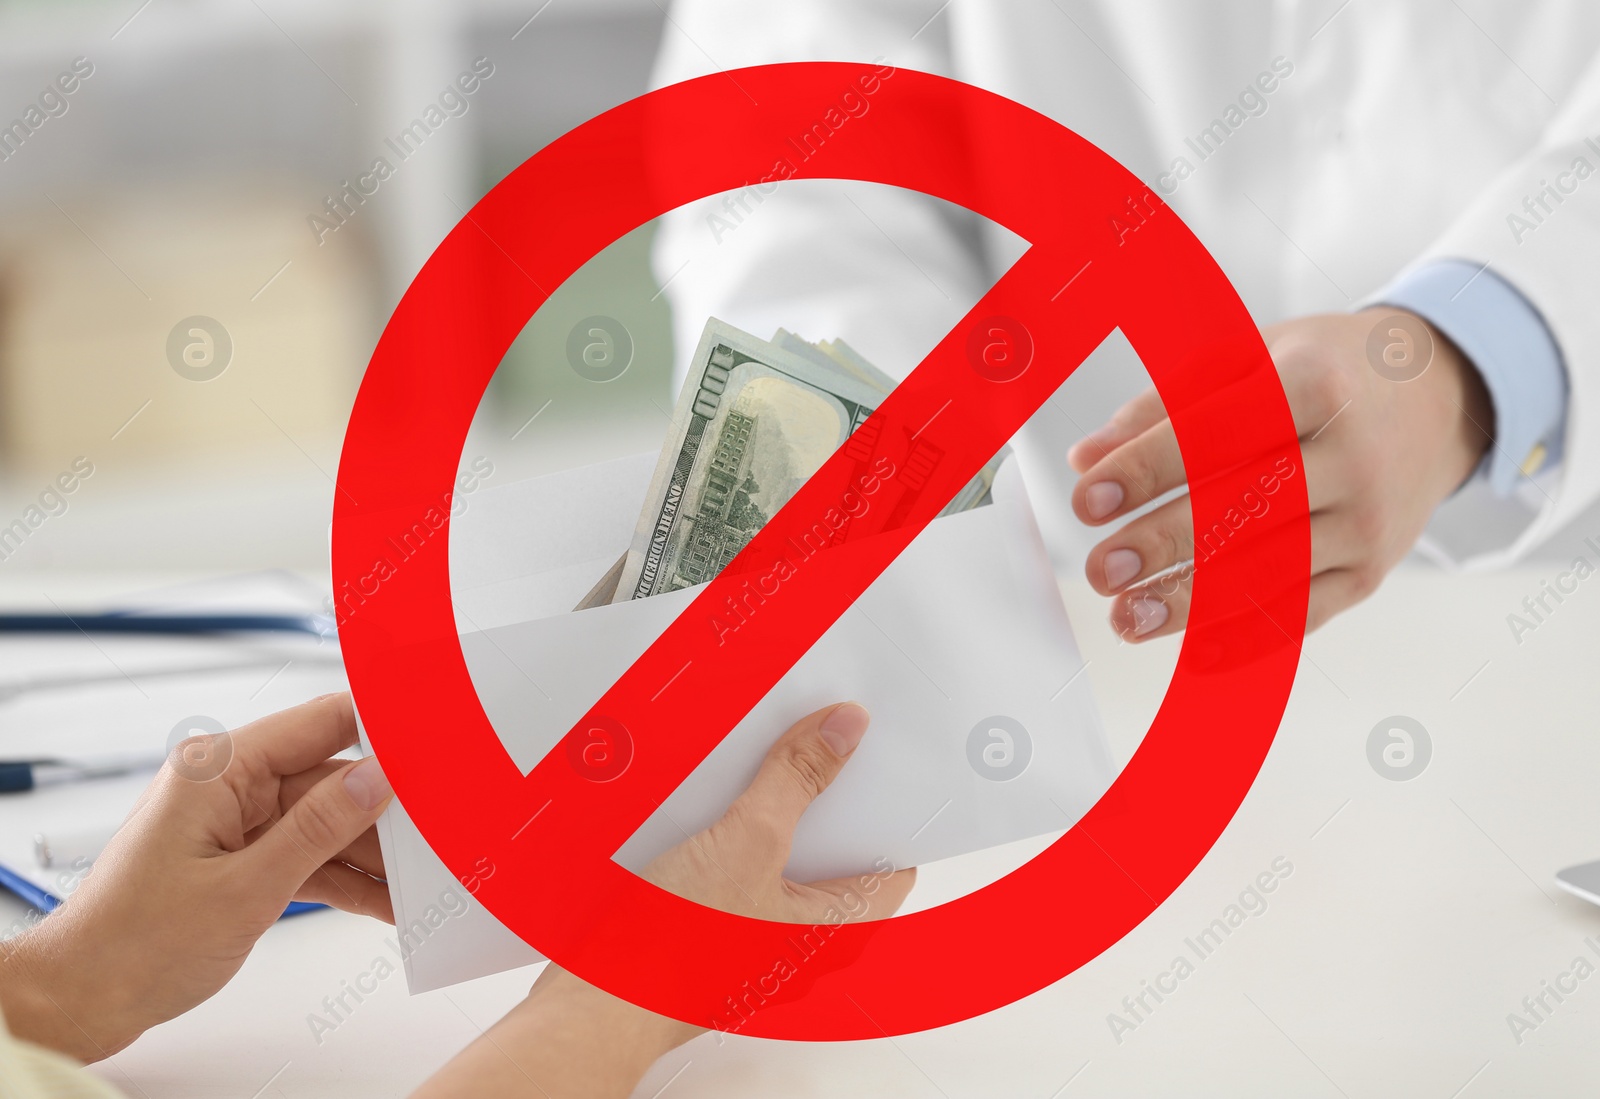 Image of Stop corruption. Illustration of red prohibition sign and patient giving bribe to doctor in clinic, closeup